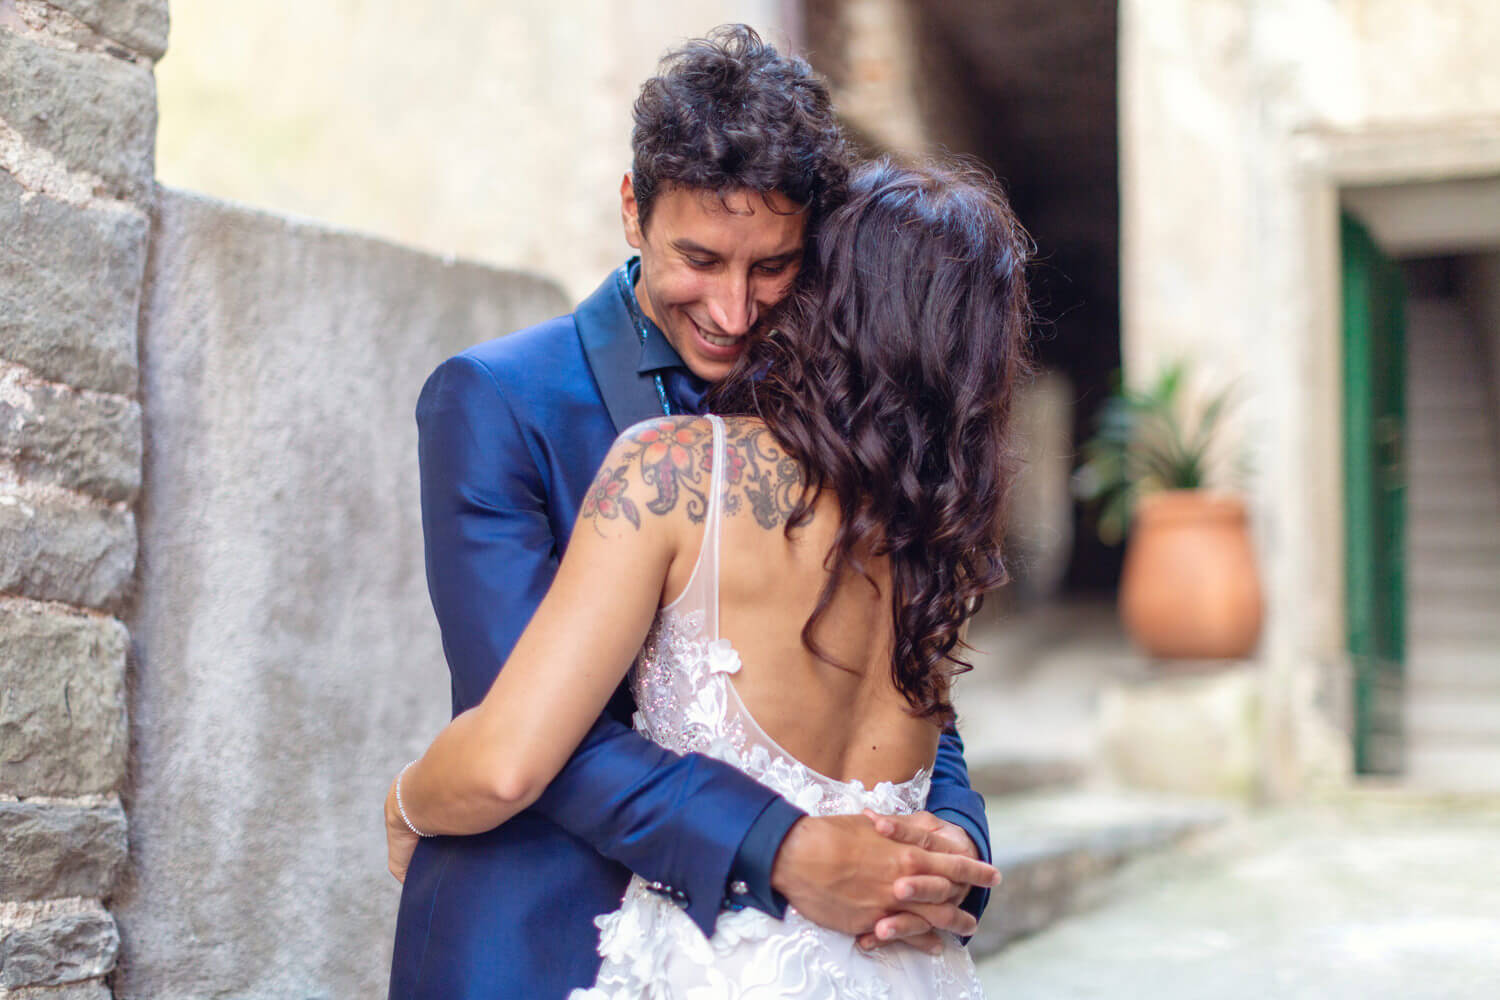 Bride and groom in Vernazza captured during their Post-Wedding Photoshoot